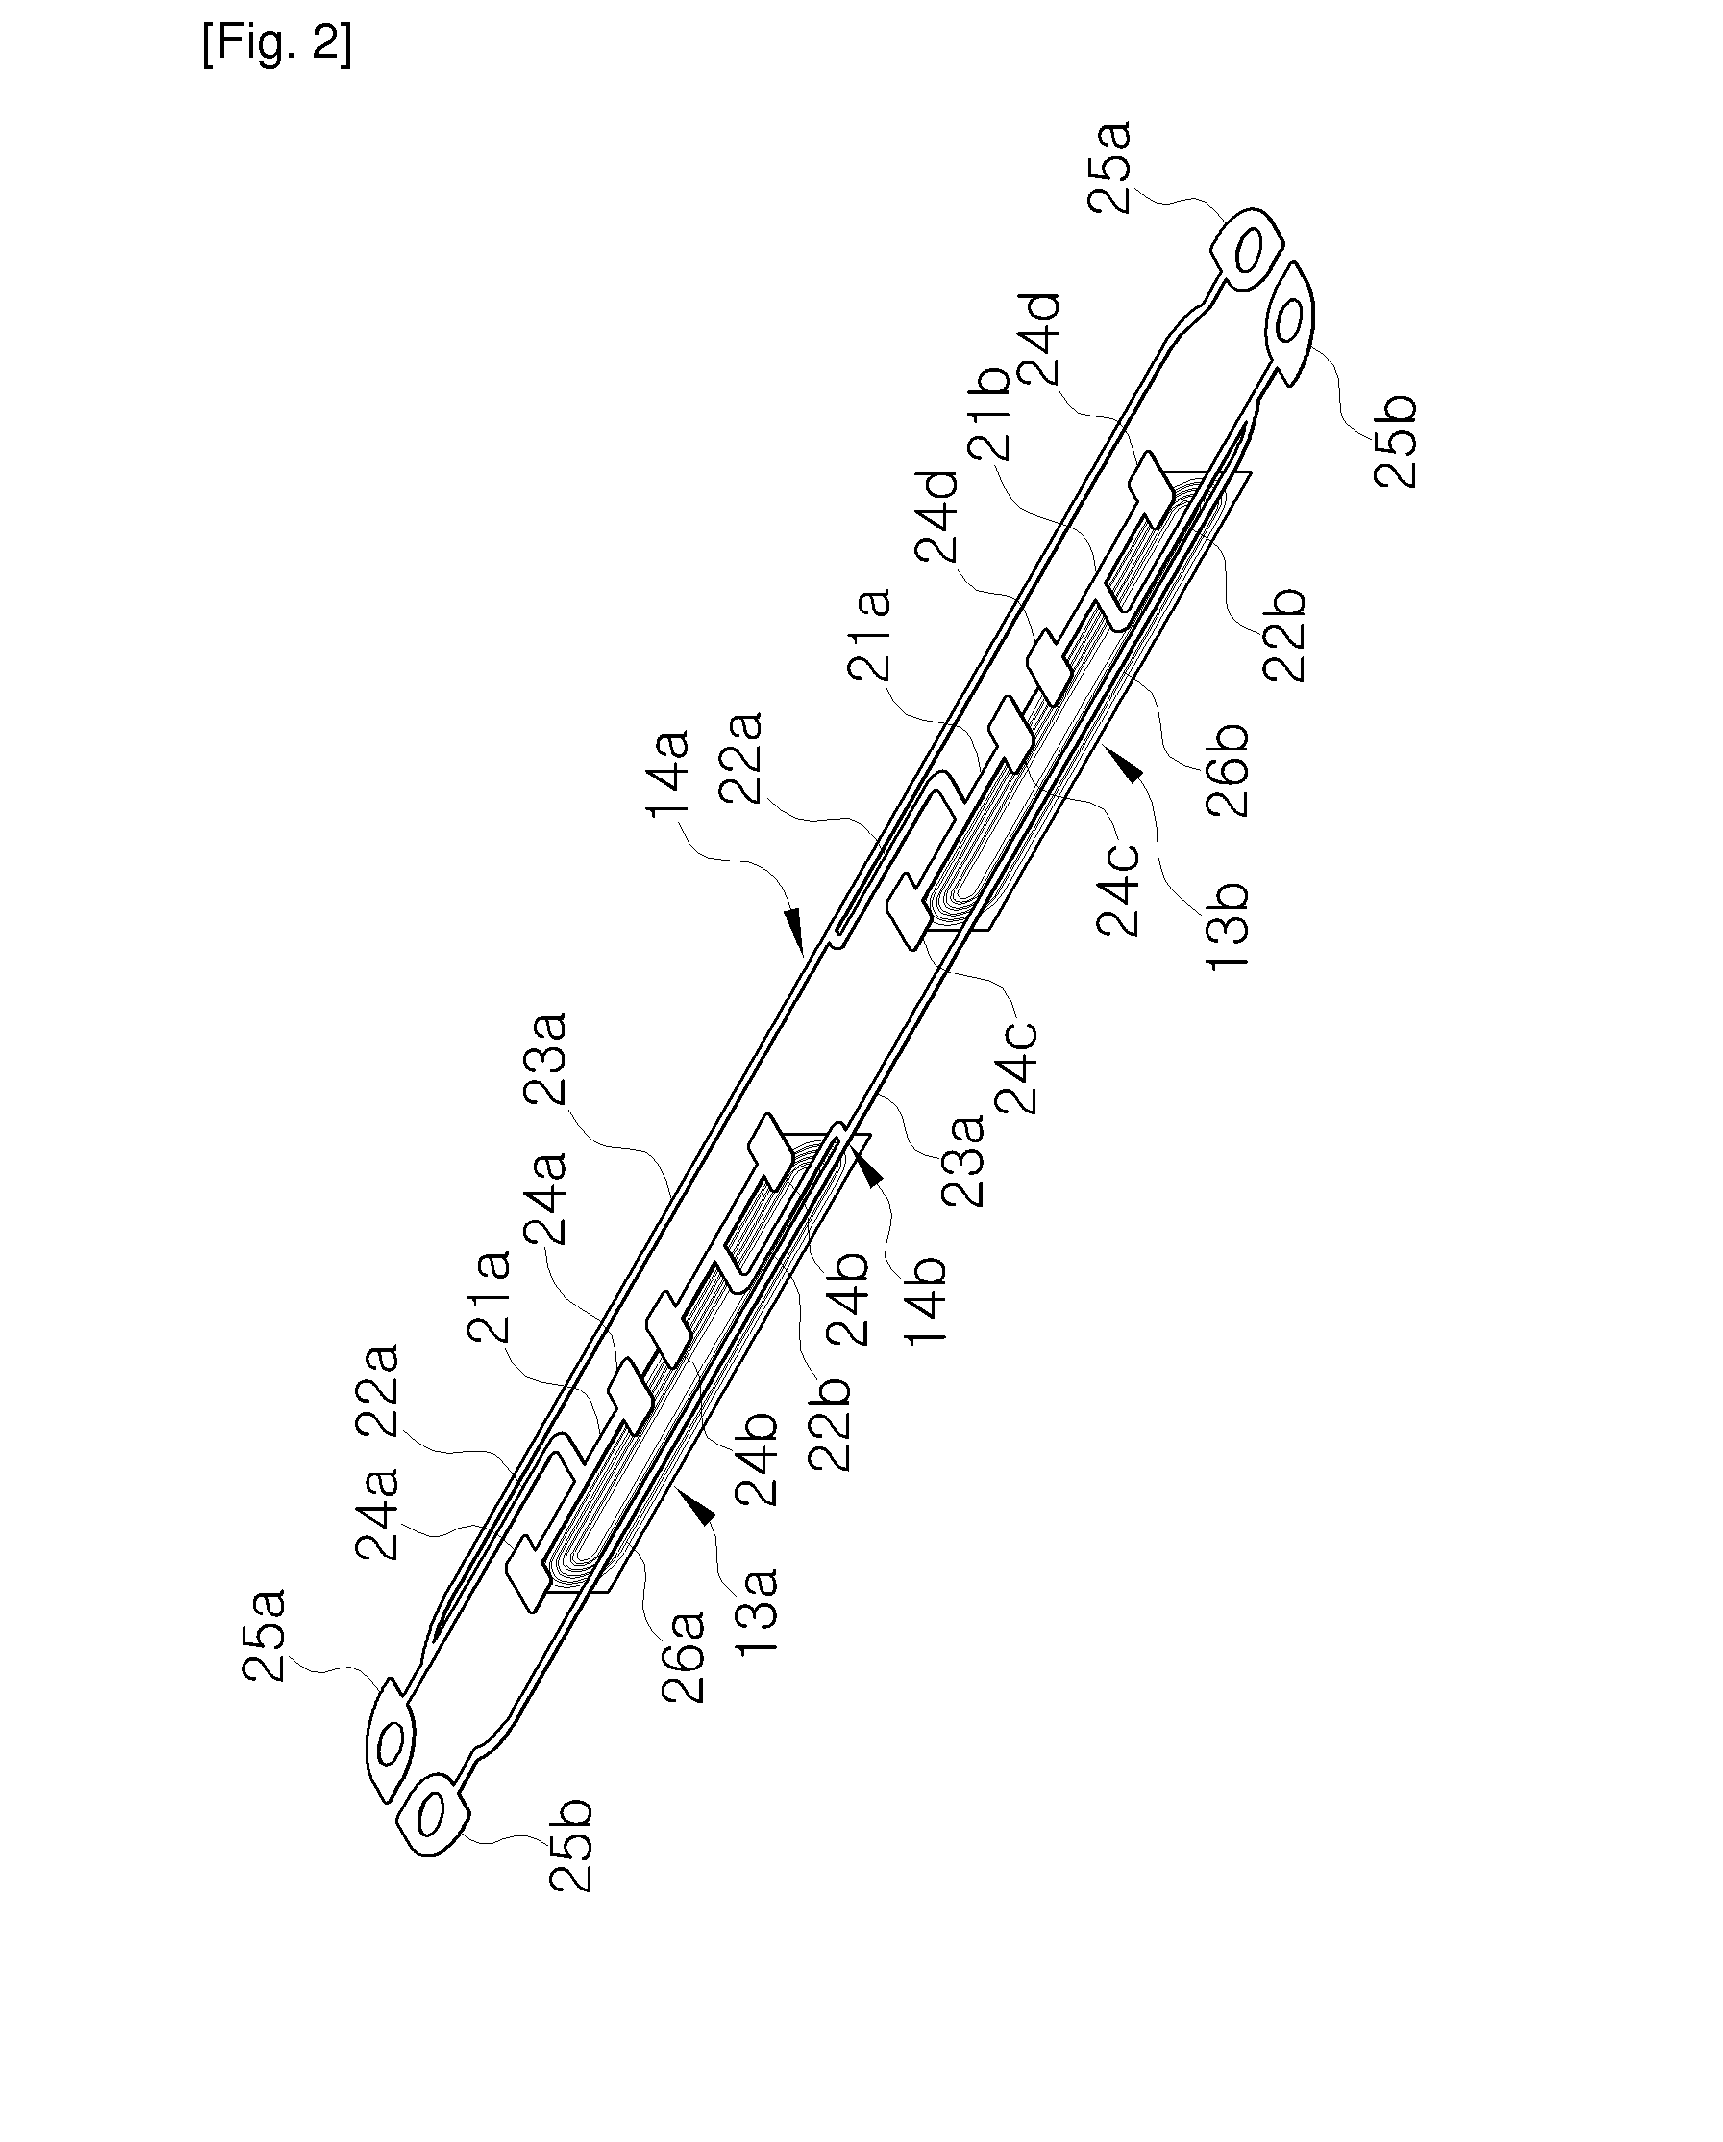 Flat-type speaker having a plurality of consecutively connected magnetic circuits